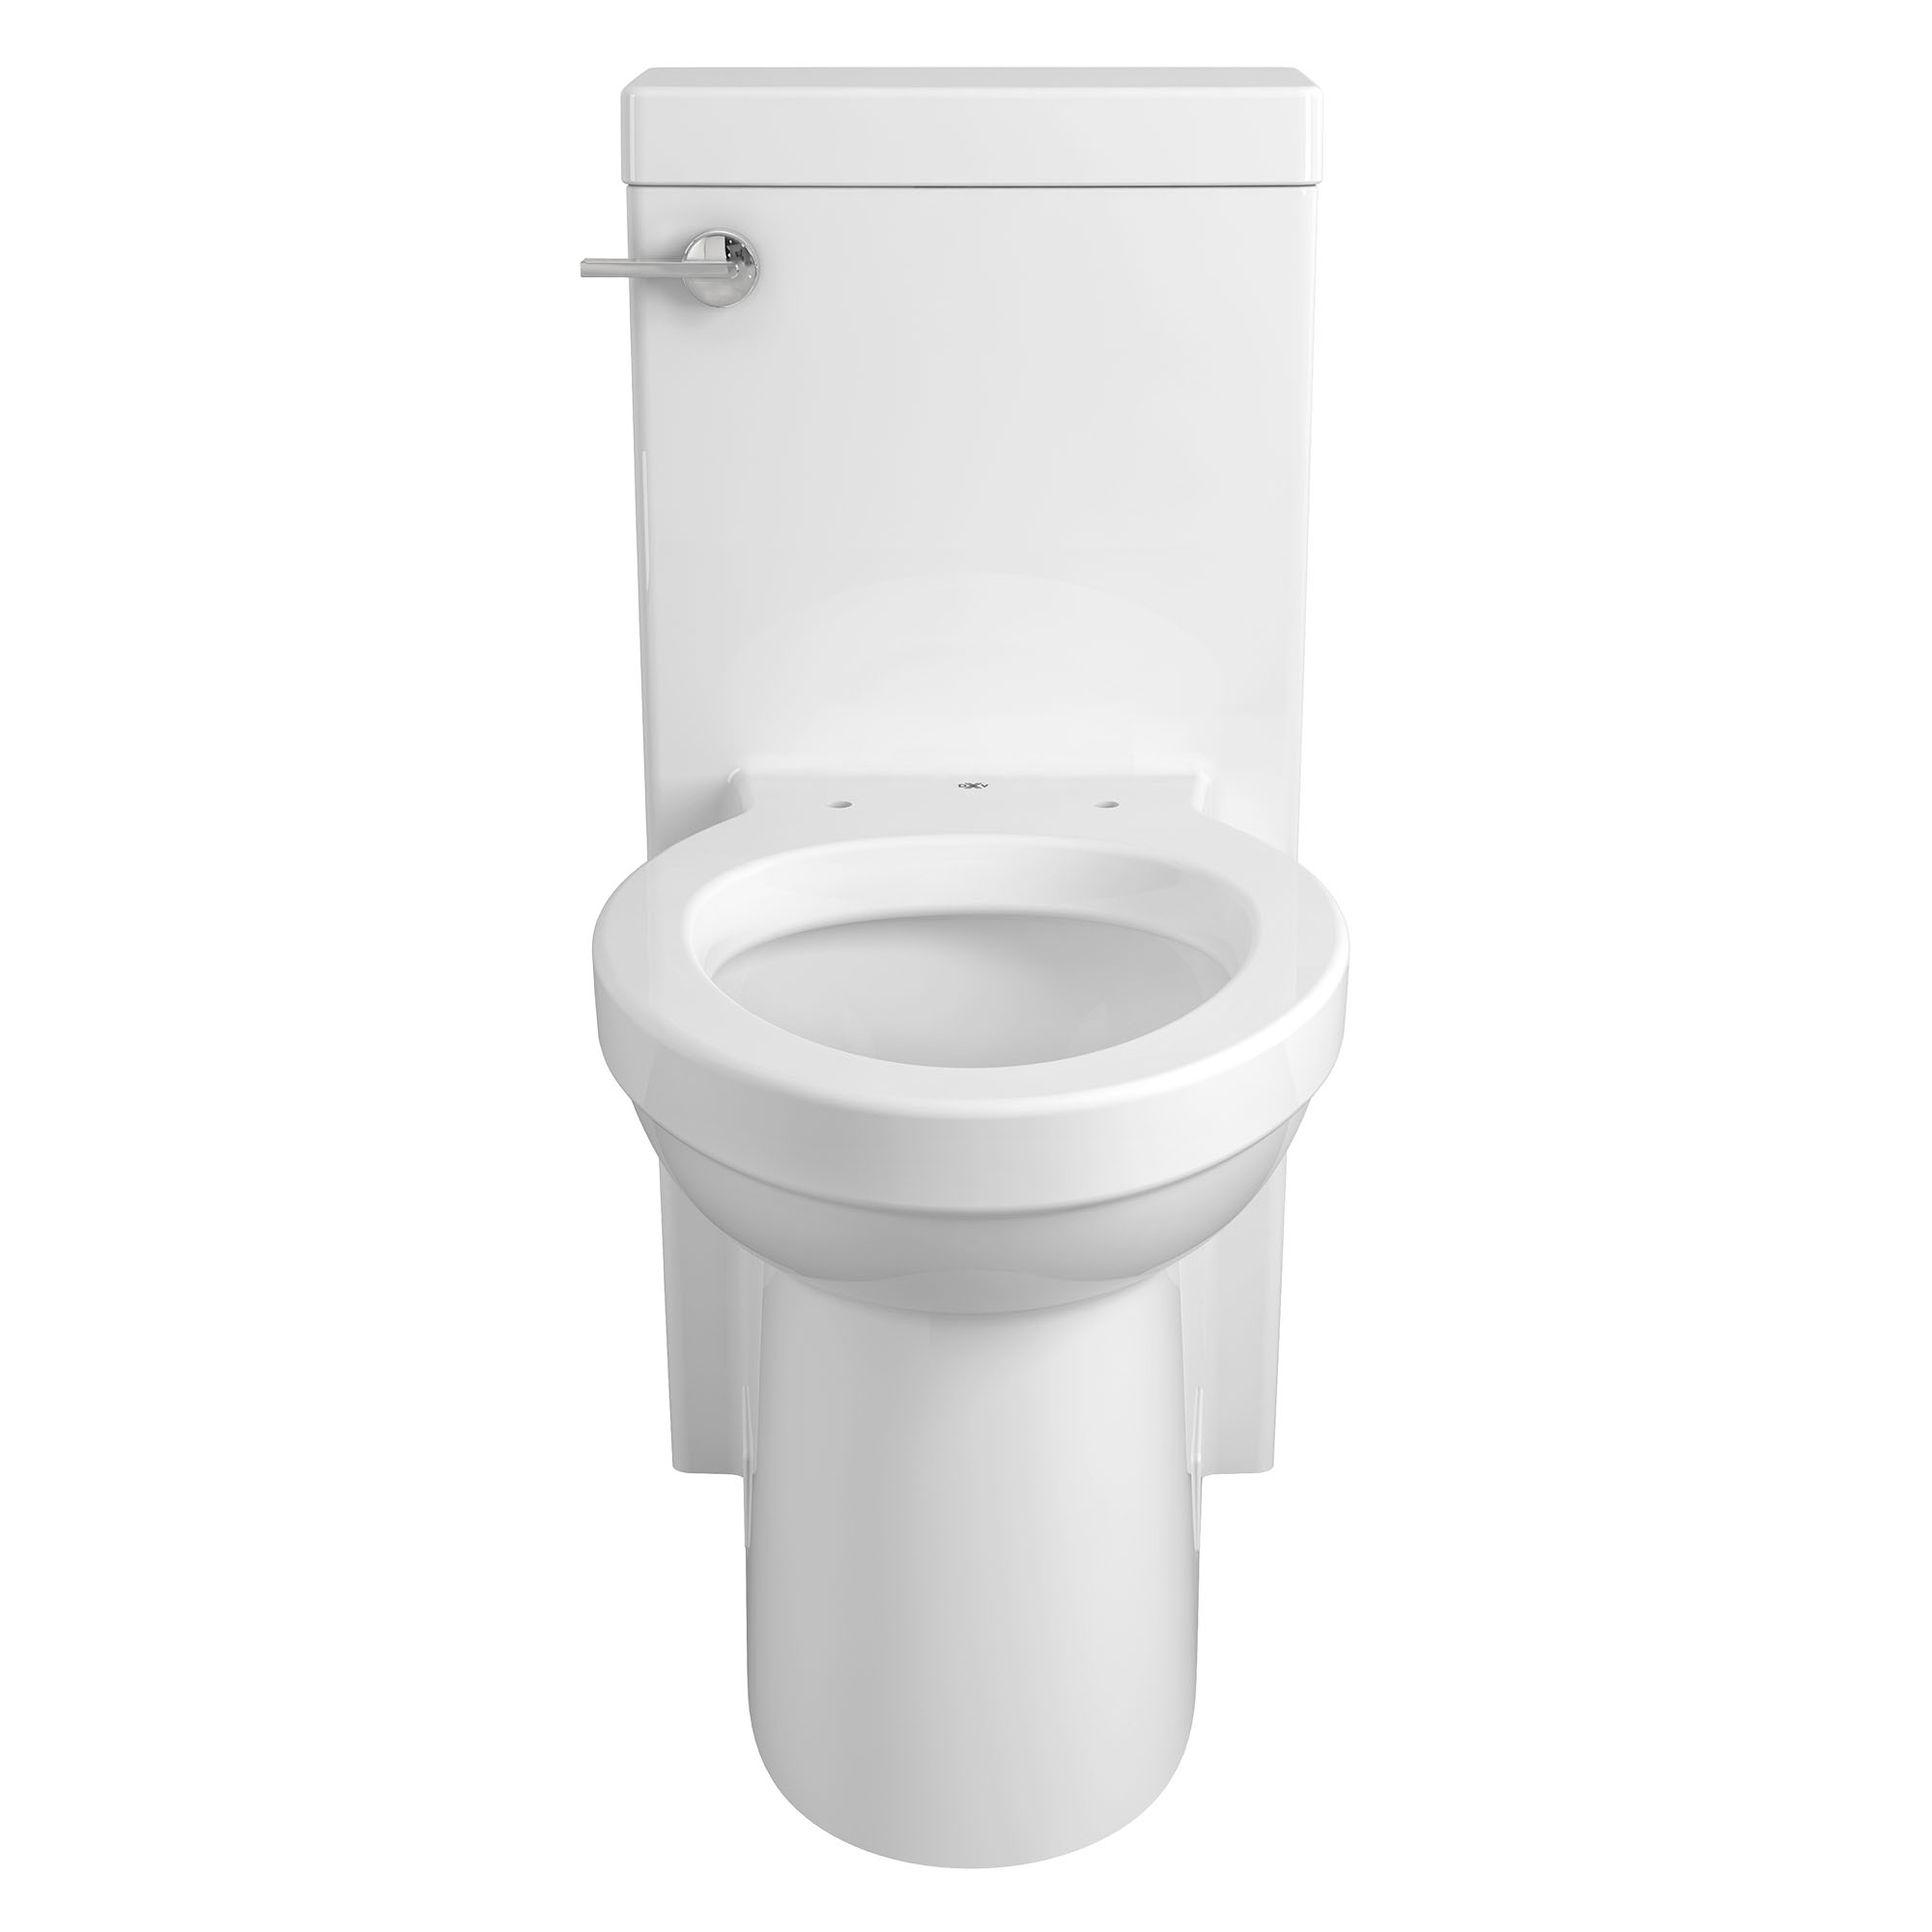 Cossu One-Piece Chair Height Elongated Toilet with Seat